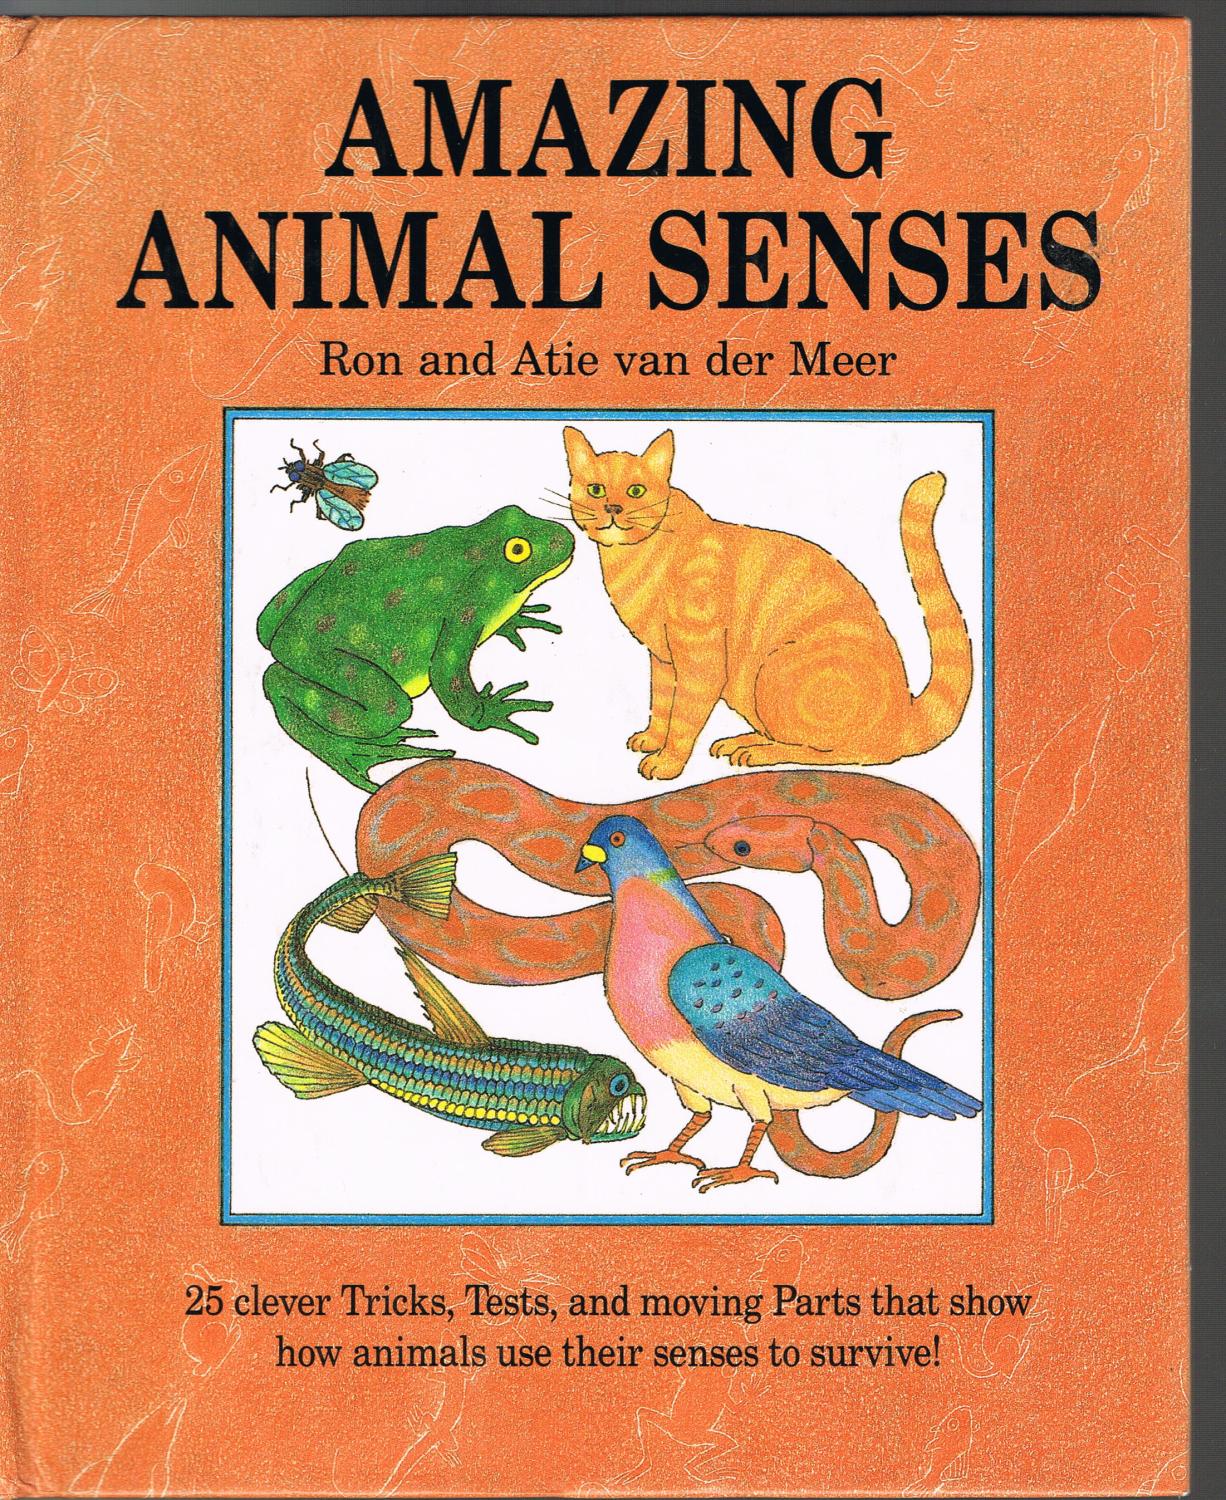 Amazing Animal Senses by VAN DER MEER, Ron & Atie: Very Good Hard Cover  (1990) First Edition. | Jenny Wren Books